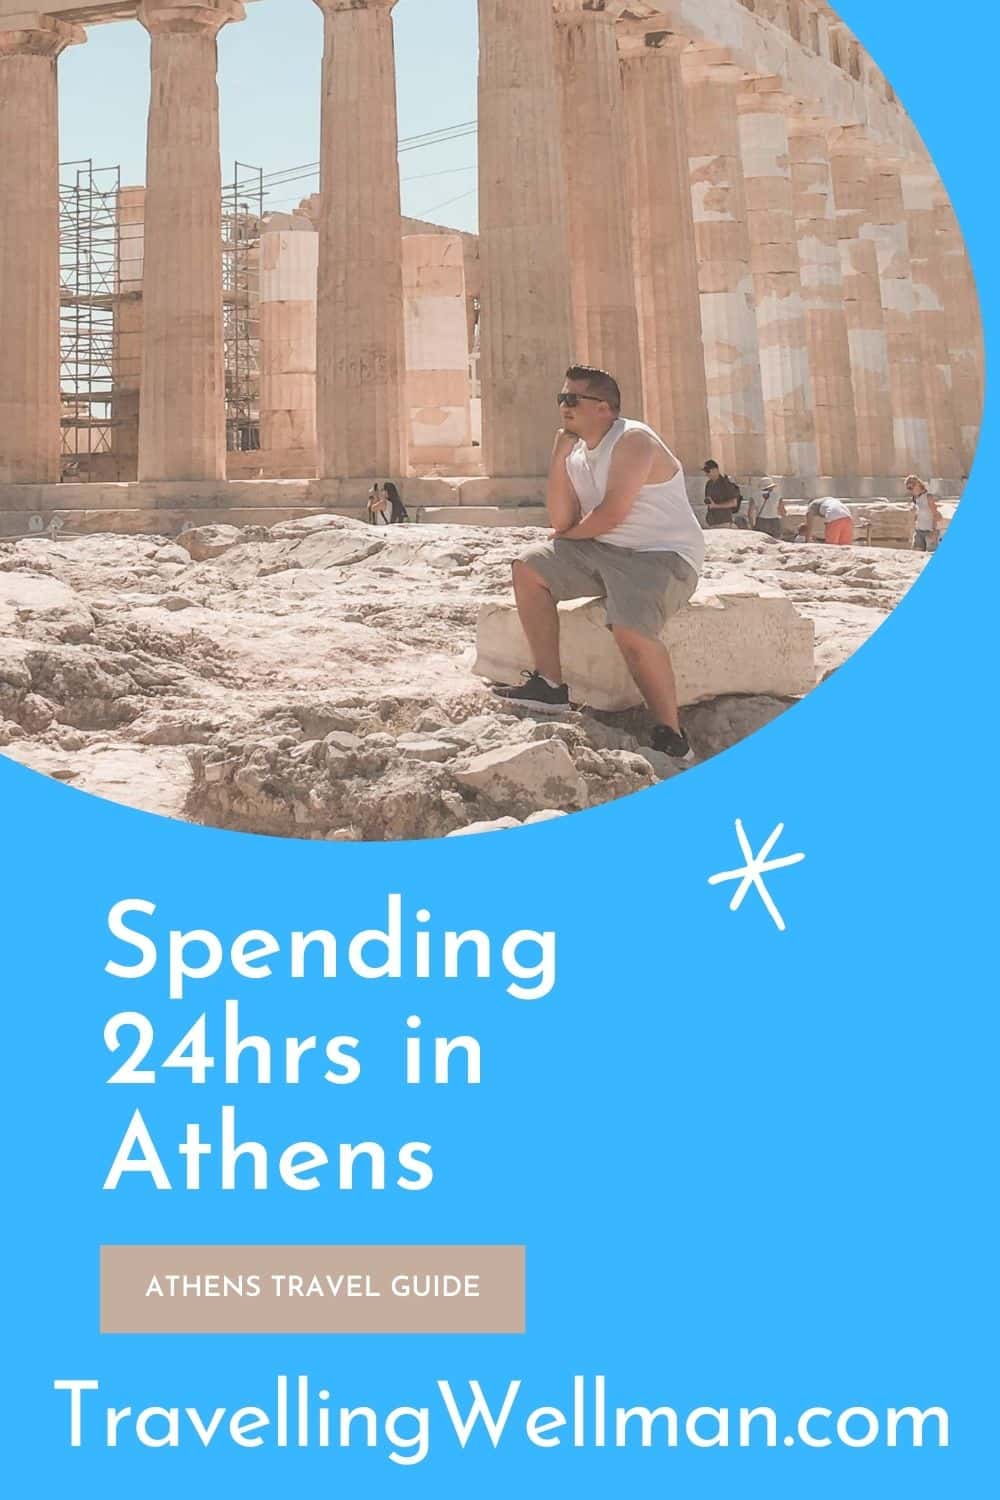 How to Spend 24hrs in Athens